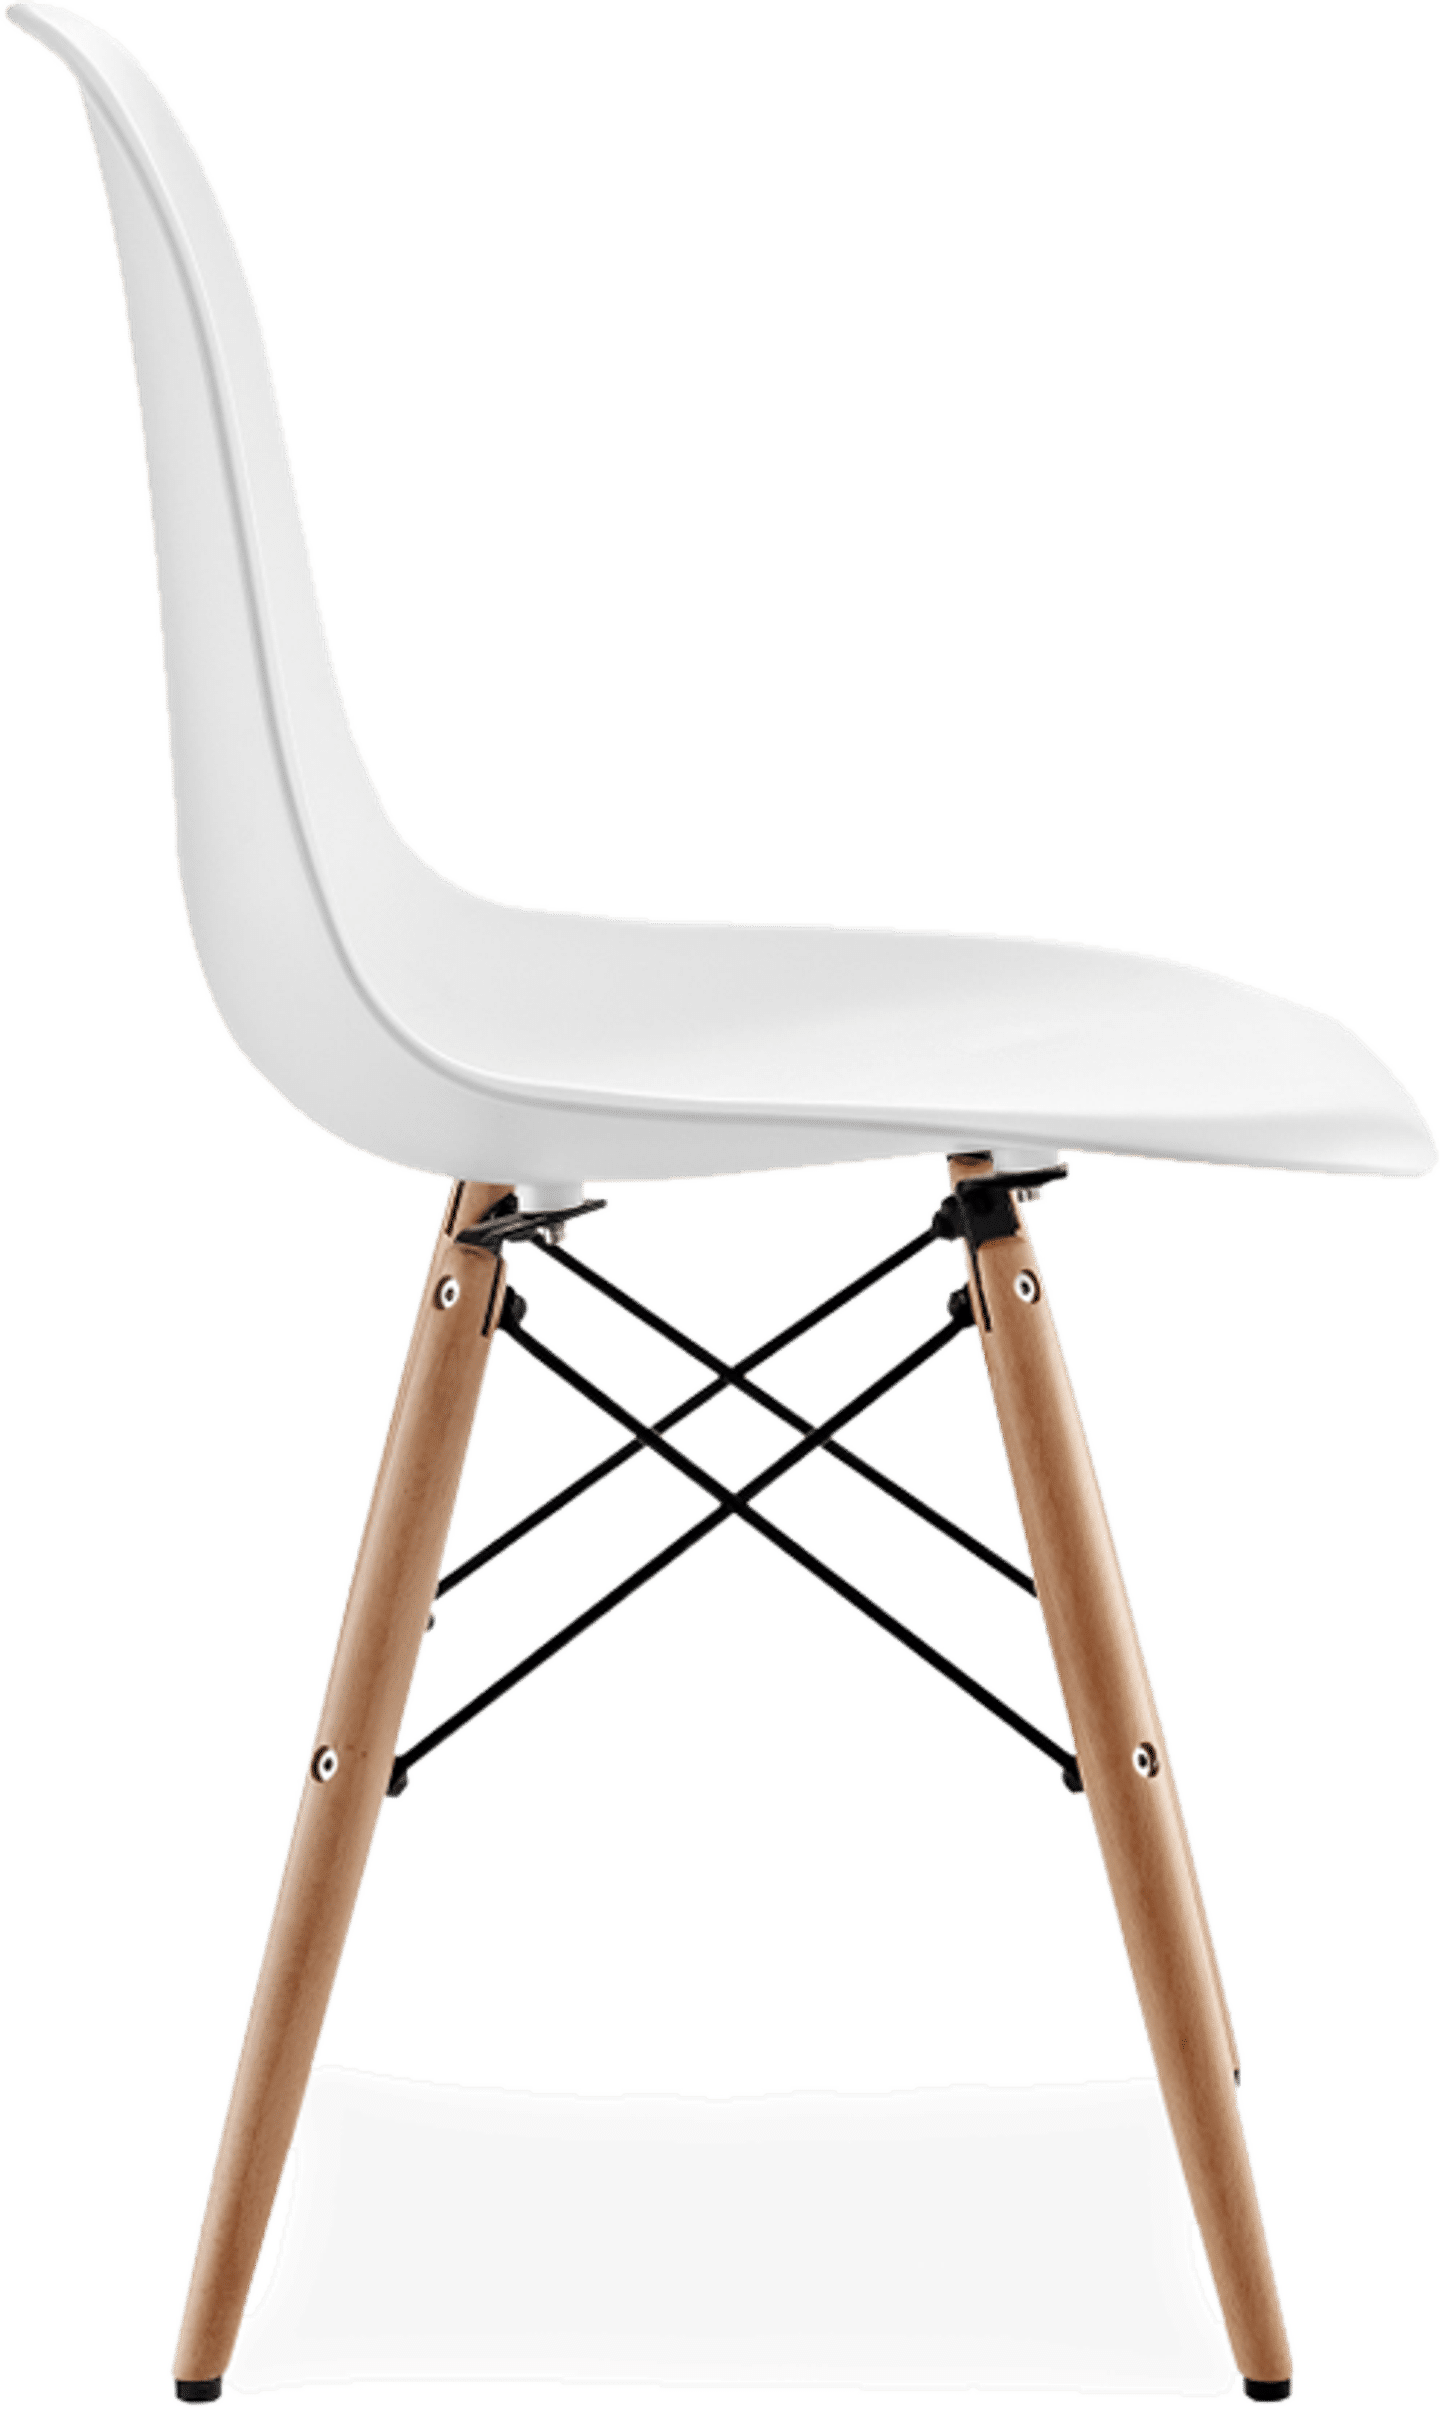 DSW Style Chair White/Light Wood image.